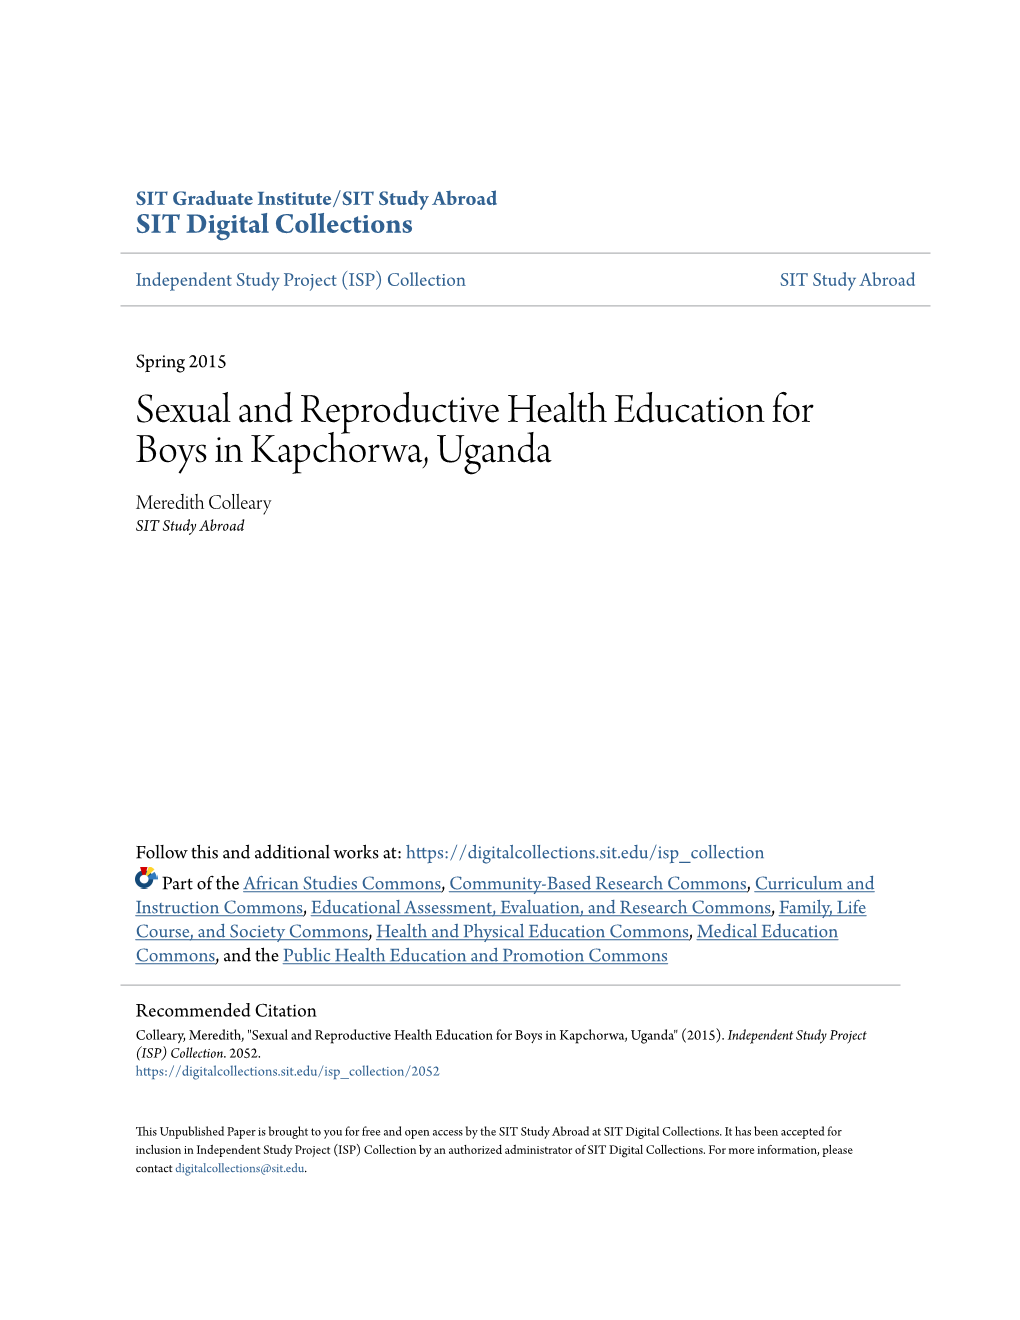 Sexual and Reproductive Health Education for Boys in Kapchorwa, Uganda Meredith Colleary SIT Study Abroad